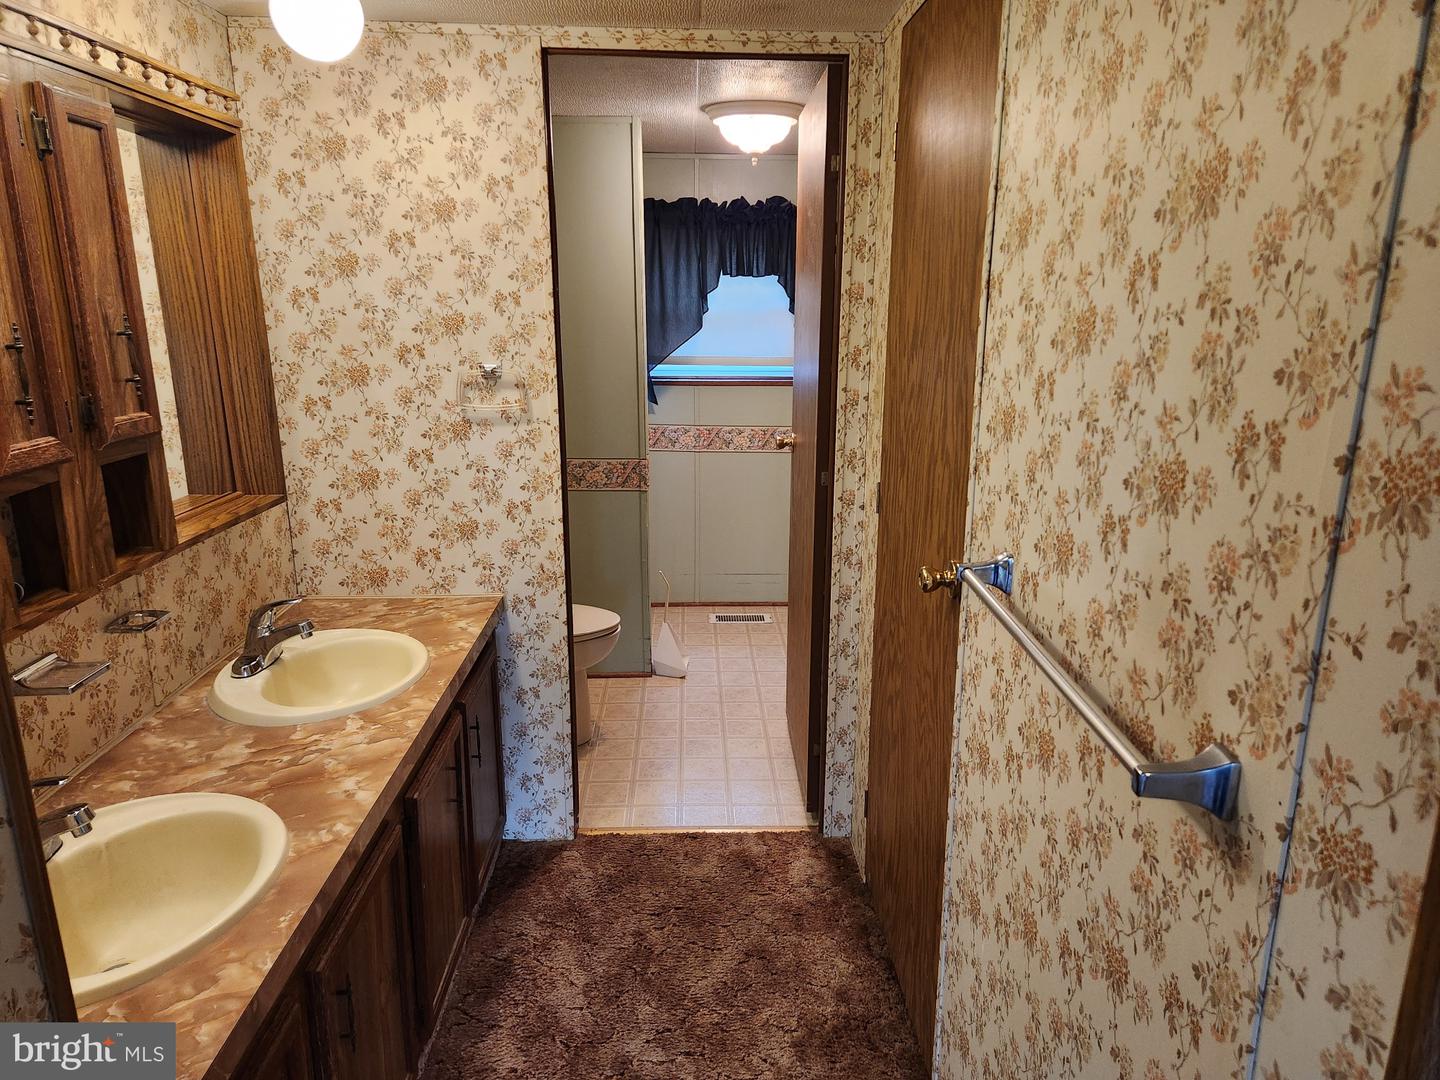 Photo 13 of 18 of 448 Aster mobile home